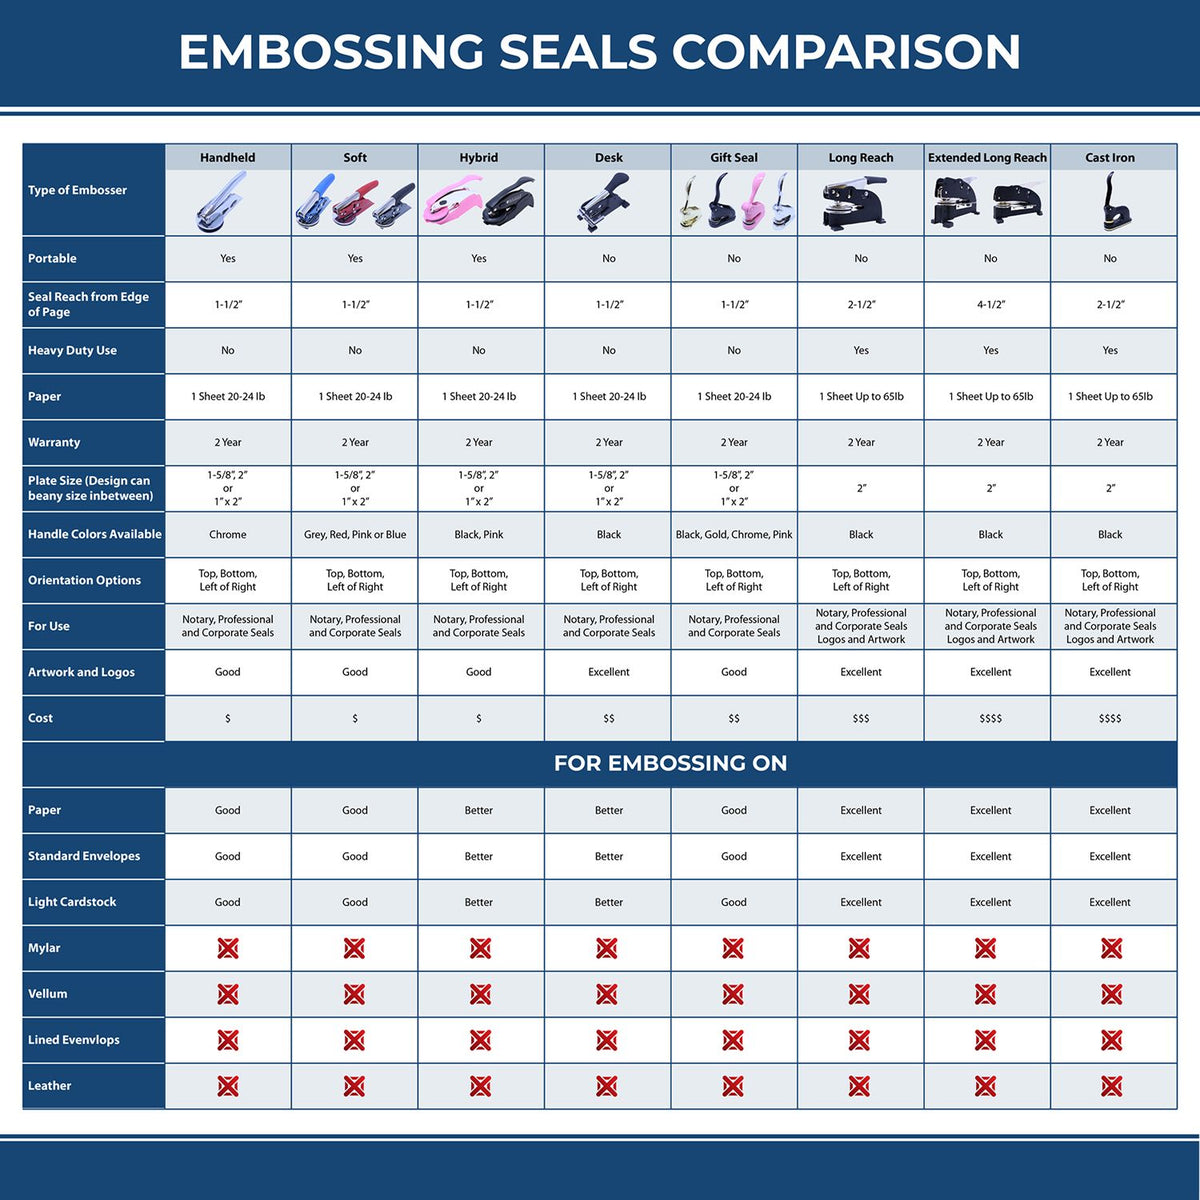 A comparison chart for the different types of mount models available for the Heavy Duty Cast Iron Alaska Land Surveyor Seal Embosser.